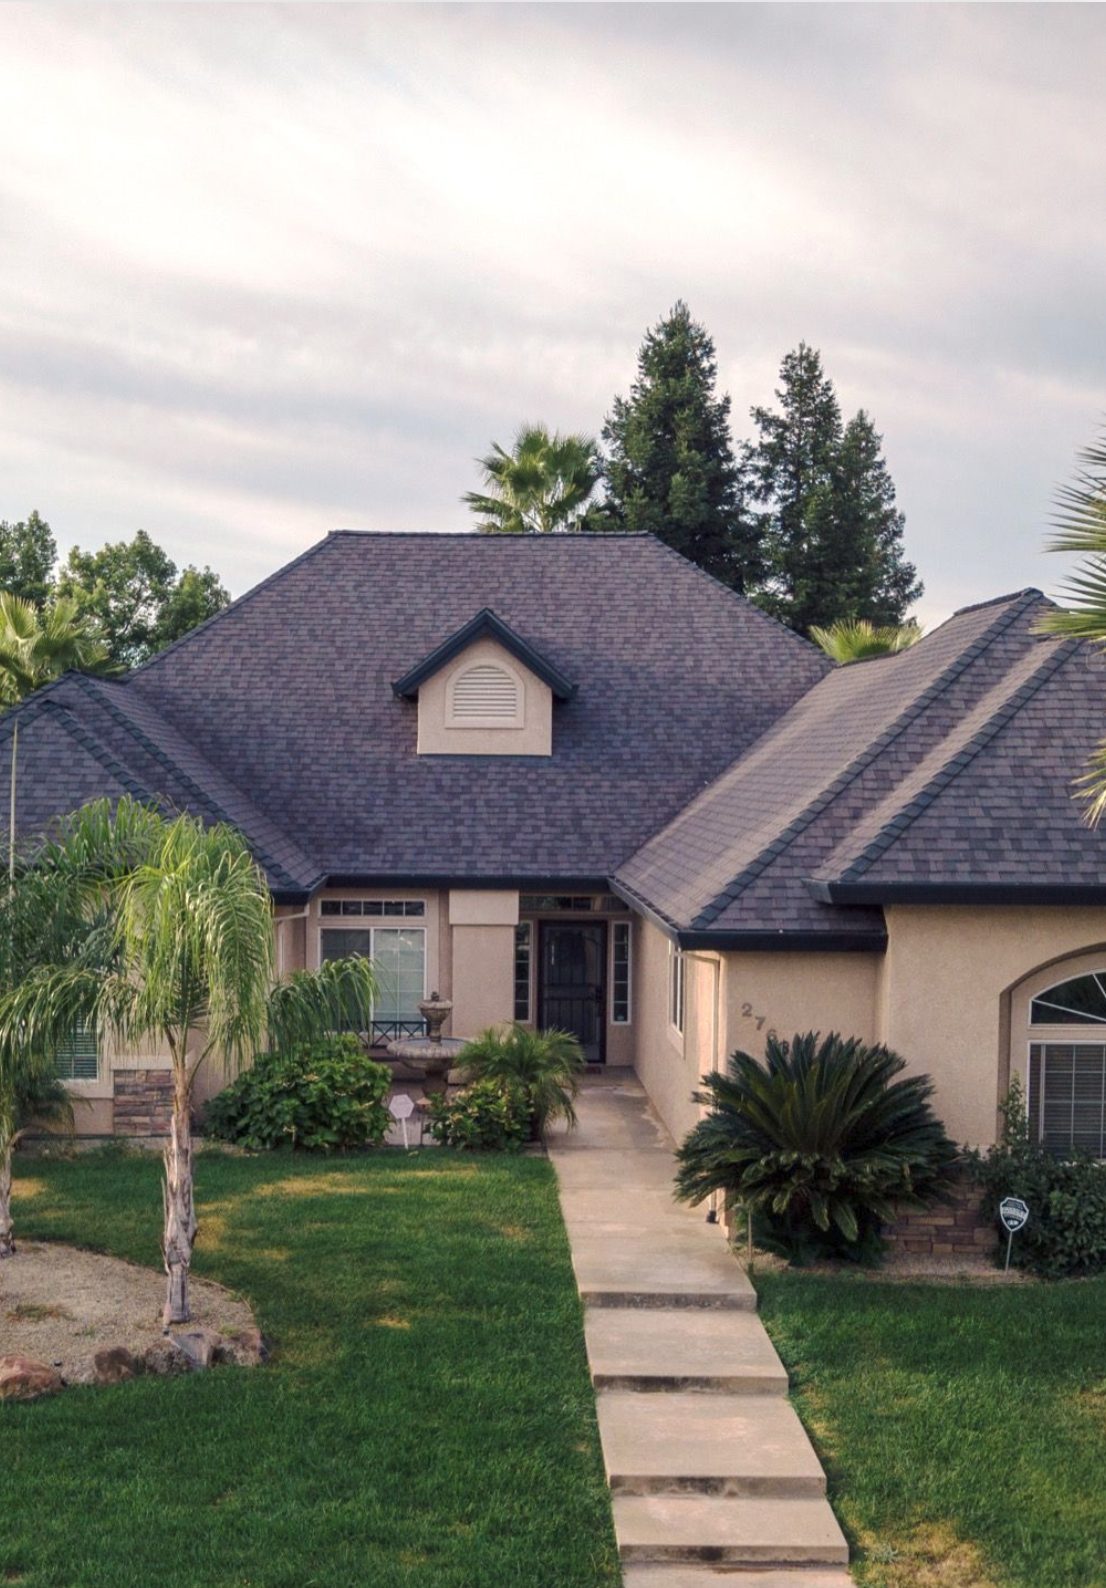 Commercial Roofing Bend OR | Commercial Roofing Contractors in Bend OR | Residential Roofing Bend OR | New Roofs Installations & Repair Bend OR